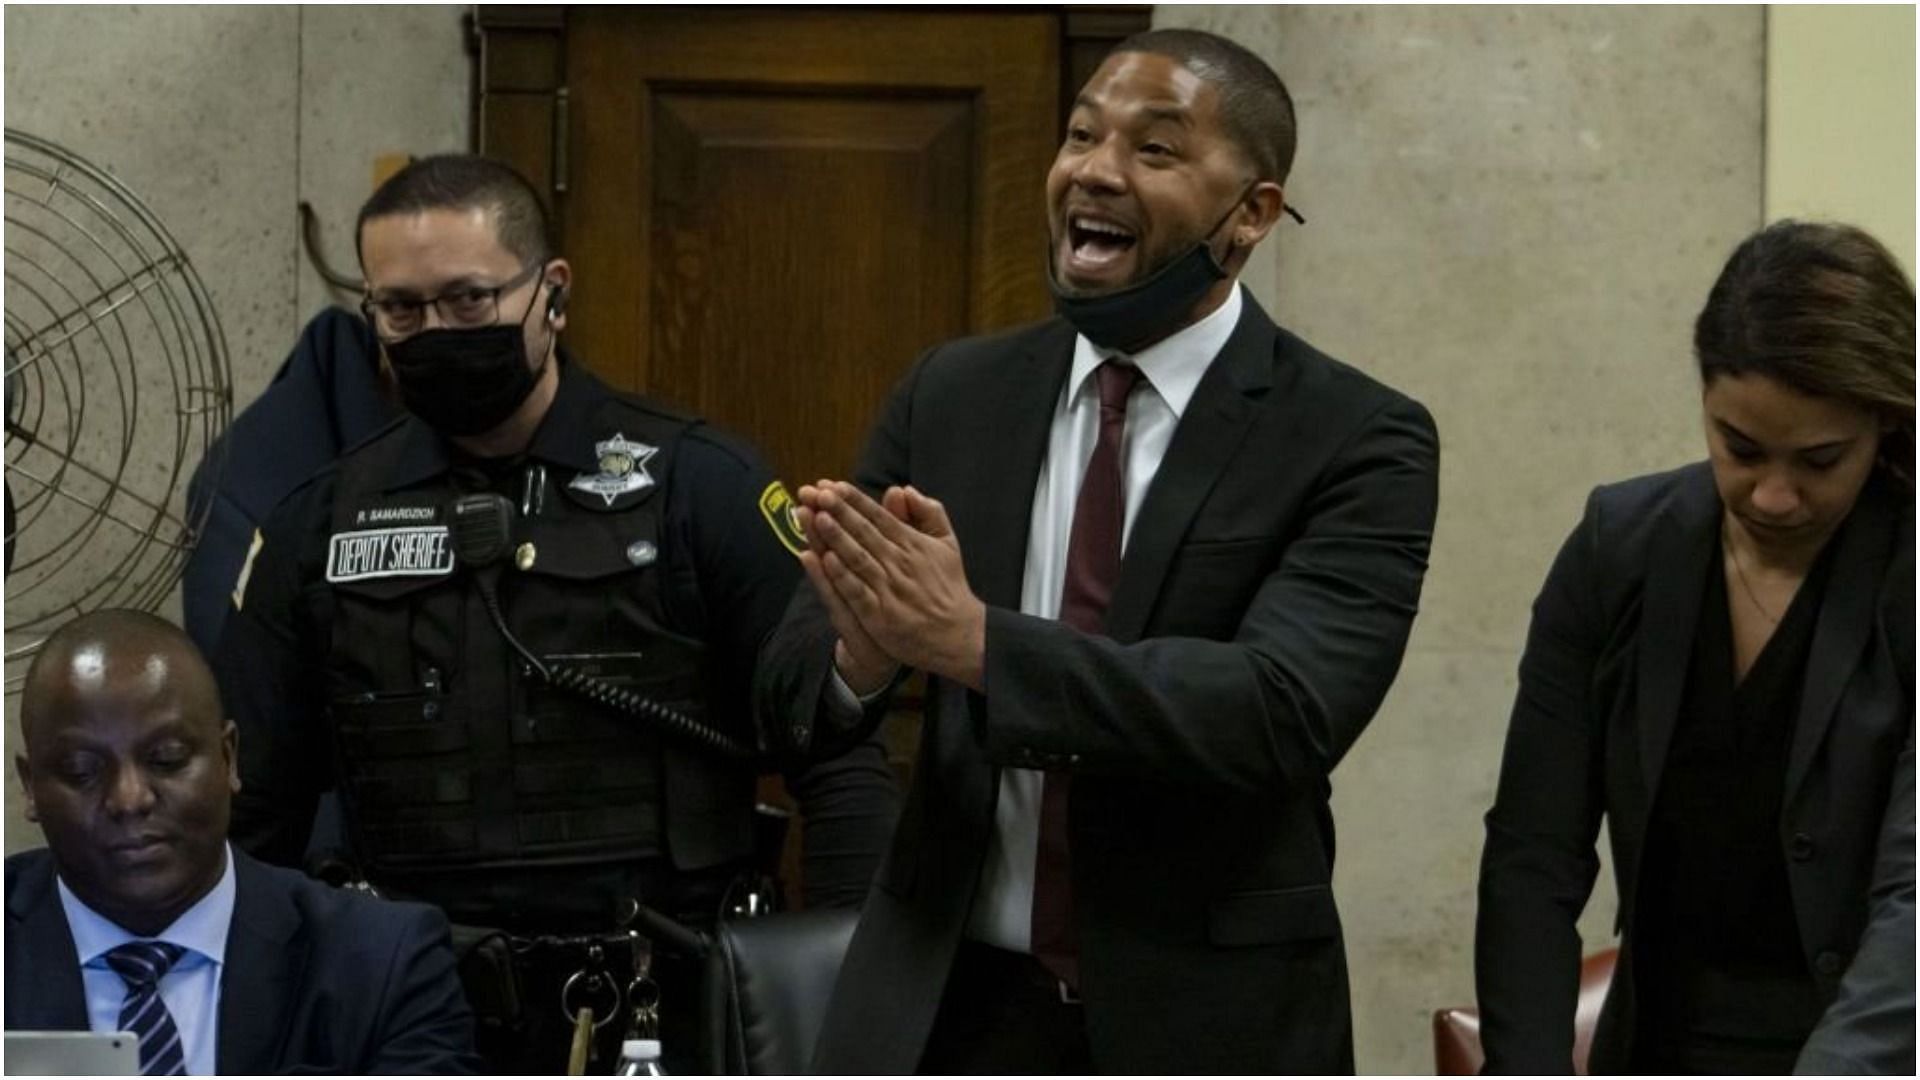 Jussie Smollett speaks to Judge James Linn after his sentence is read (Image via Brian Cassella/Getty Images)